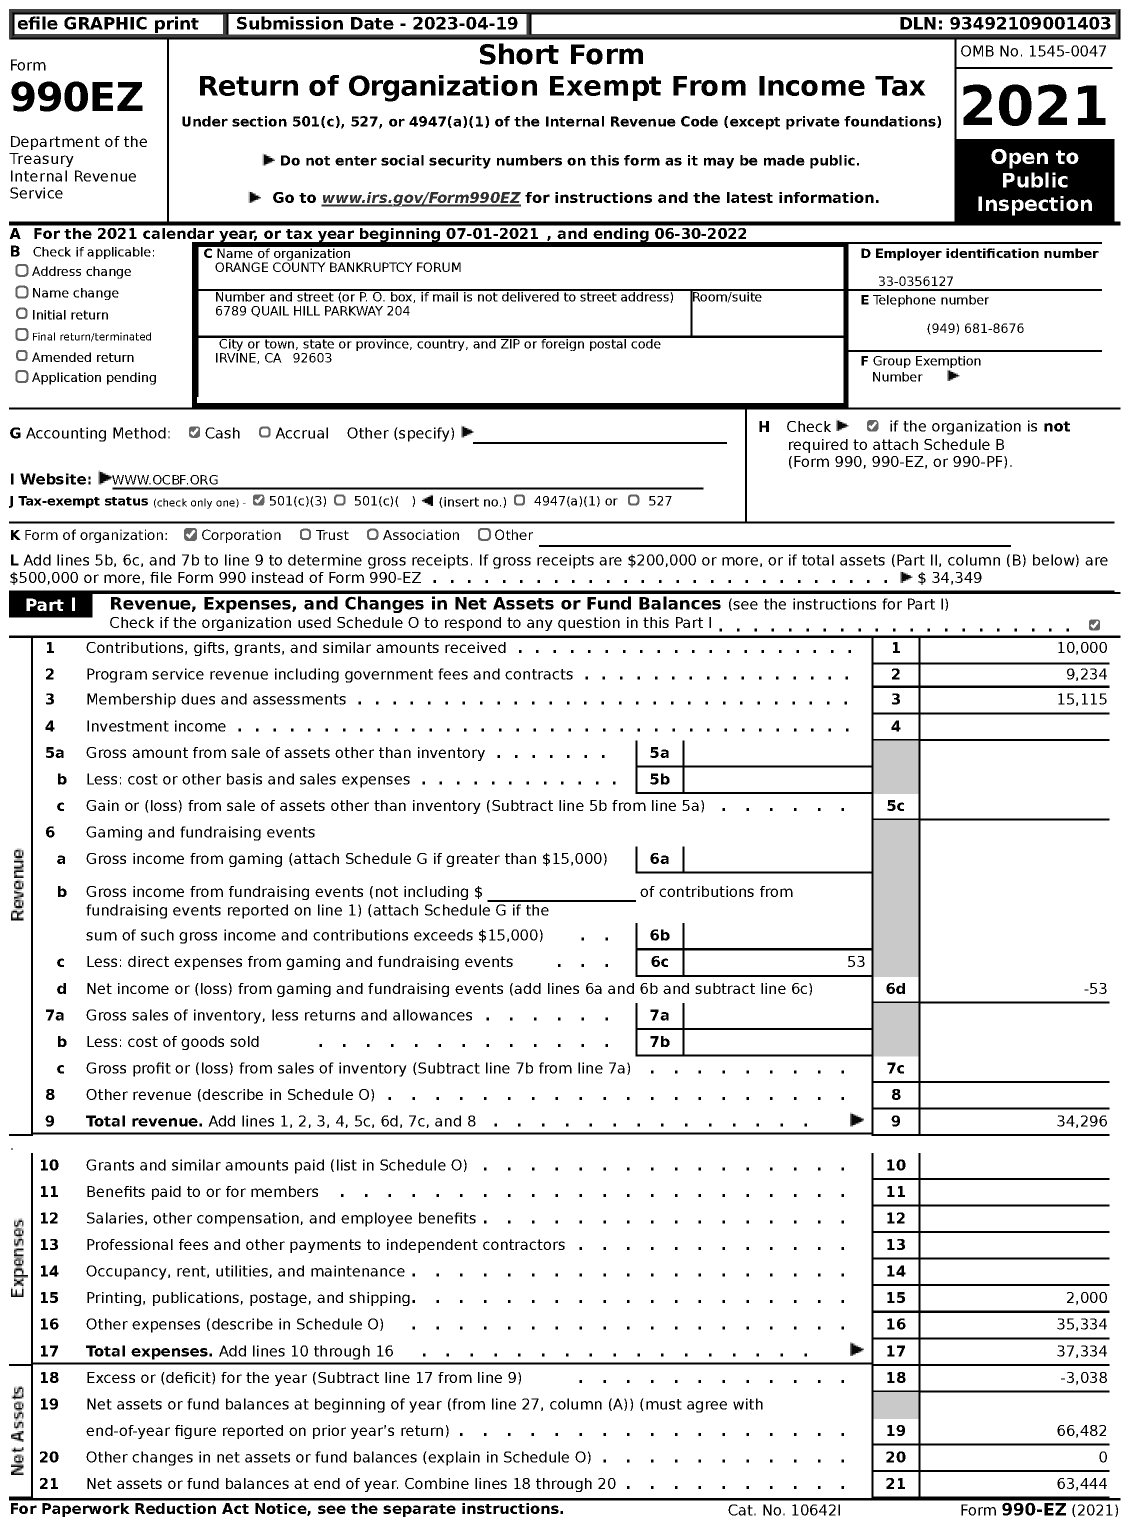 Image of first page of 2021 Form 990EZ for Orange County Bankruptcy Forum